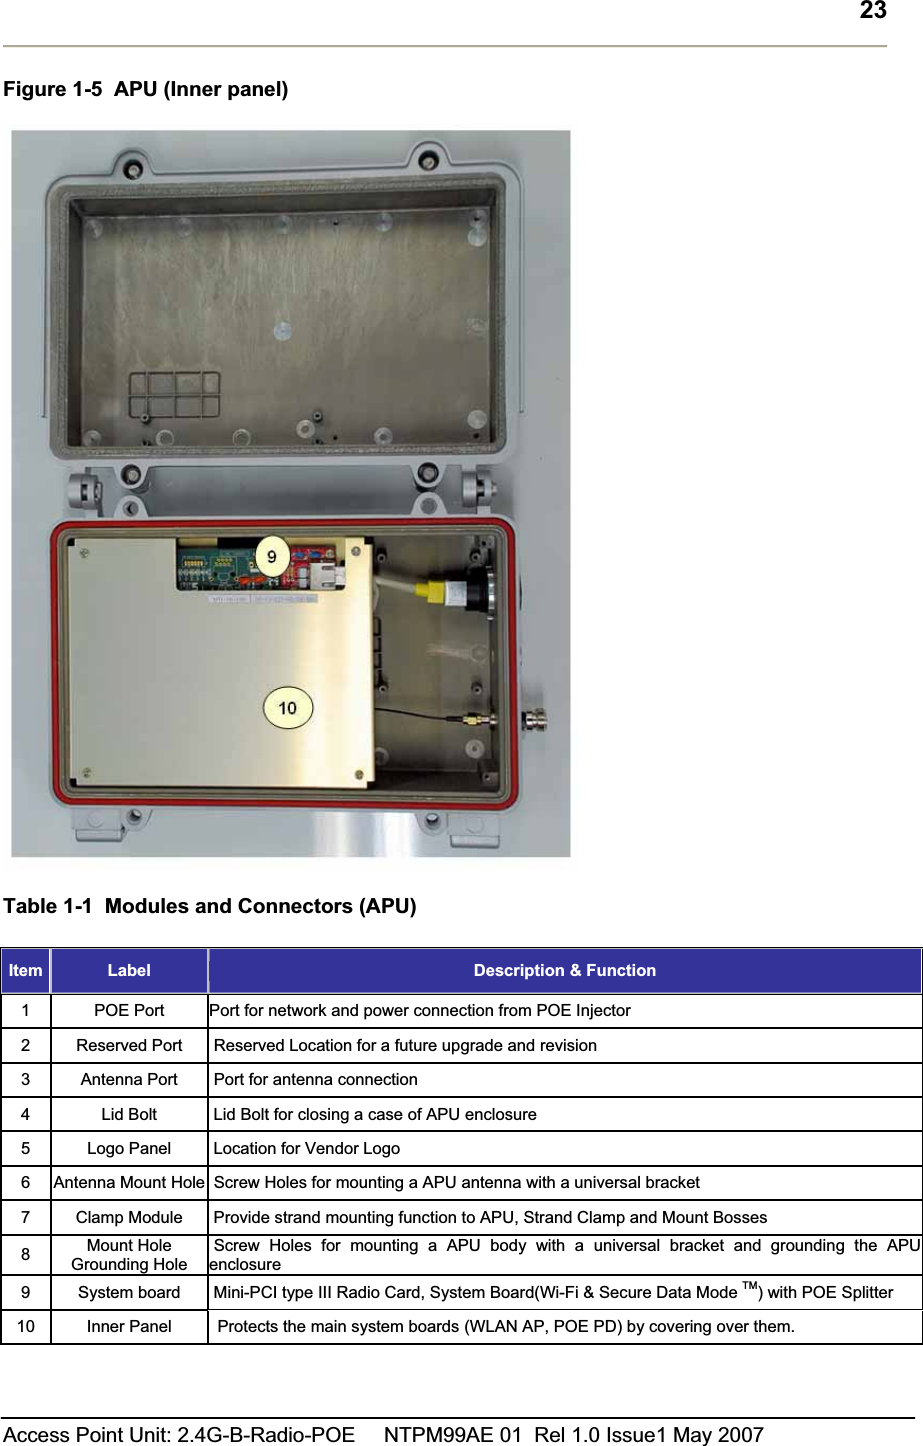 23Access Point Unit: 2.4G-B-Radio-POE     NTPM99AE 01  Rel 1.0 Issue1 May 2007 Figure 1-5  APU (Inner panel) Table 1-1  Modules and Connectors (APU) Item Label Description &amp; Function1  POE Port  Port for network and power connection from POE Injector 2  Reserved Port   Reserved Location for a future upgrade and revision  3  Antenna Port   Port for antenna connection 4  Lid Bolt   Lid Bolt for closing a case of APU enclosure 5  Logo Panel   Location for Vendor Logo 6  Antenna Mount Hole  Screw Holes for mounting a APU antenna with a universal bracket 7  Clamp Module   Provide strand mounting function to APU, Strand Clamp and Mount Bosses 8Mount Hole Grounding Hole  Screw Holes for mounting a APU body with a universal bracket and grounding the APU enclosure9  System board    Mini-PCI type III Radio Card, System Board(Wi-Fi &amp; Secure Data Mode TM) with POE Splitter 10  Inner Panel  Protects the main system boards (WLAN AP, POE PD) by covering over them. 